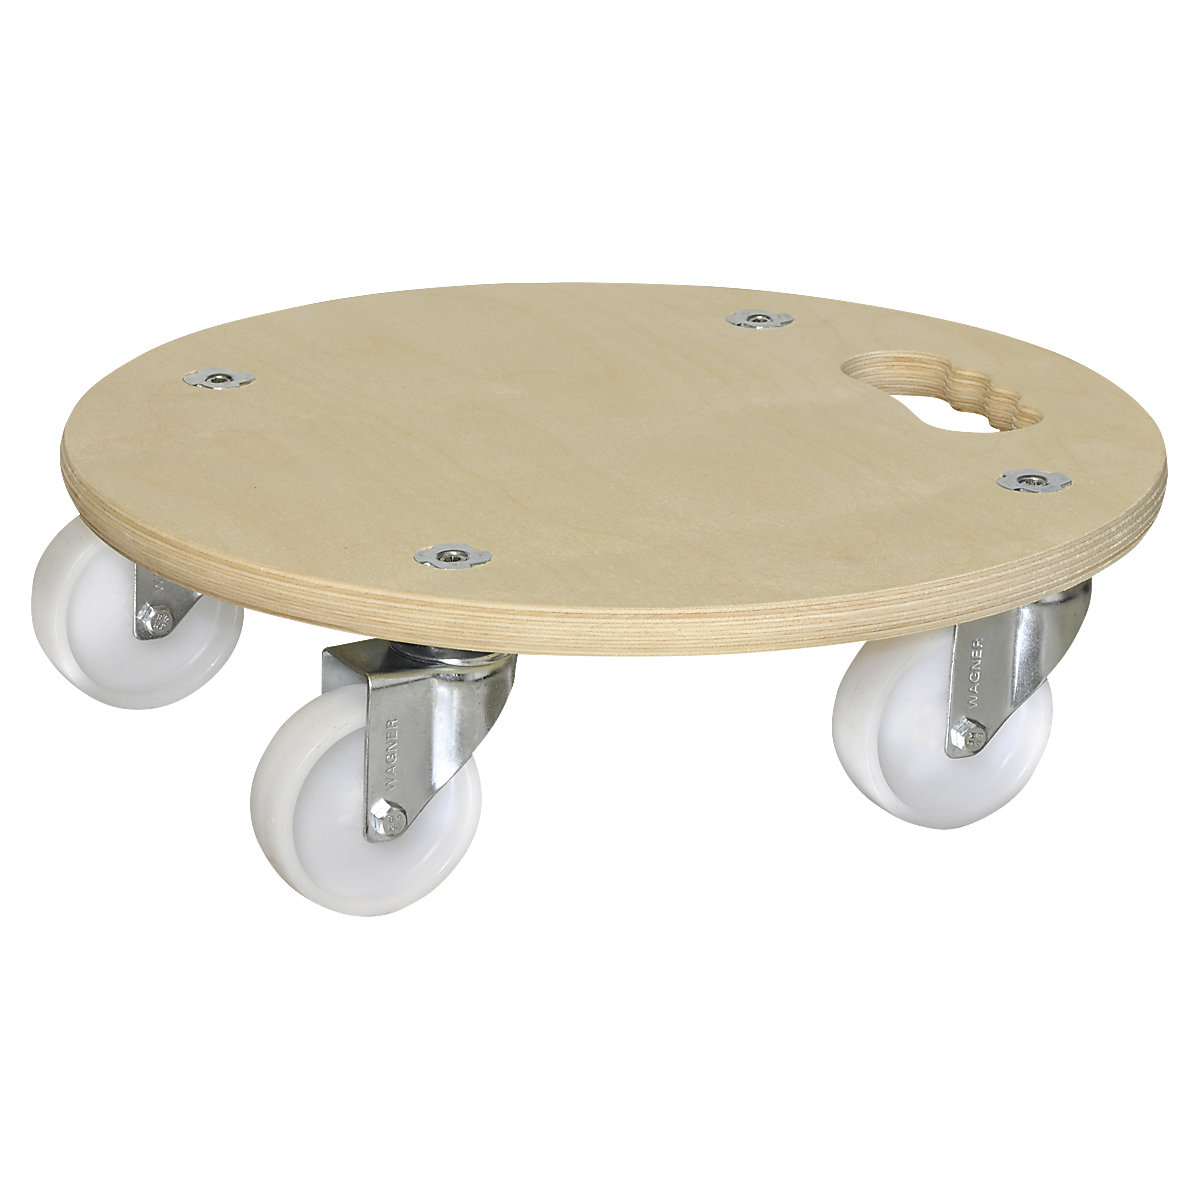 MM 1137 transport dolly, round - Wagner